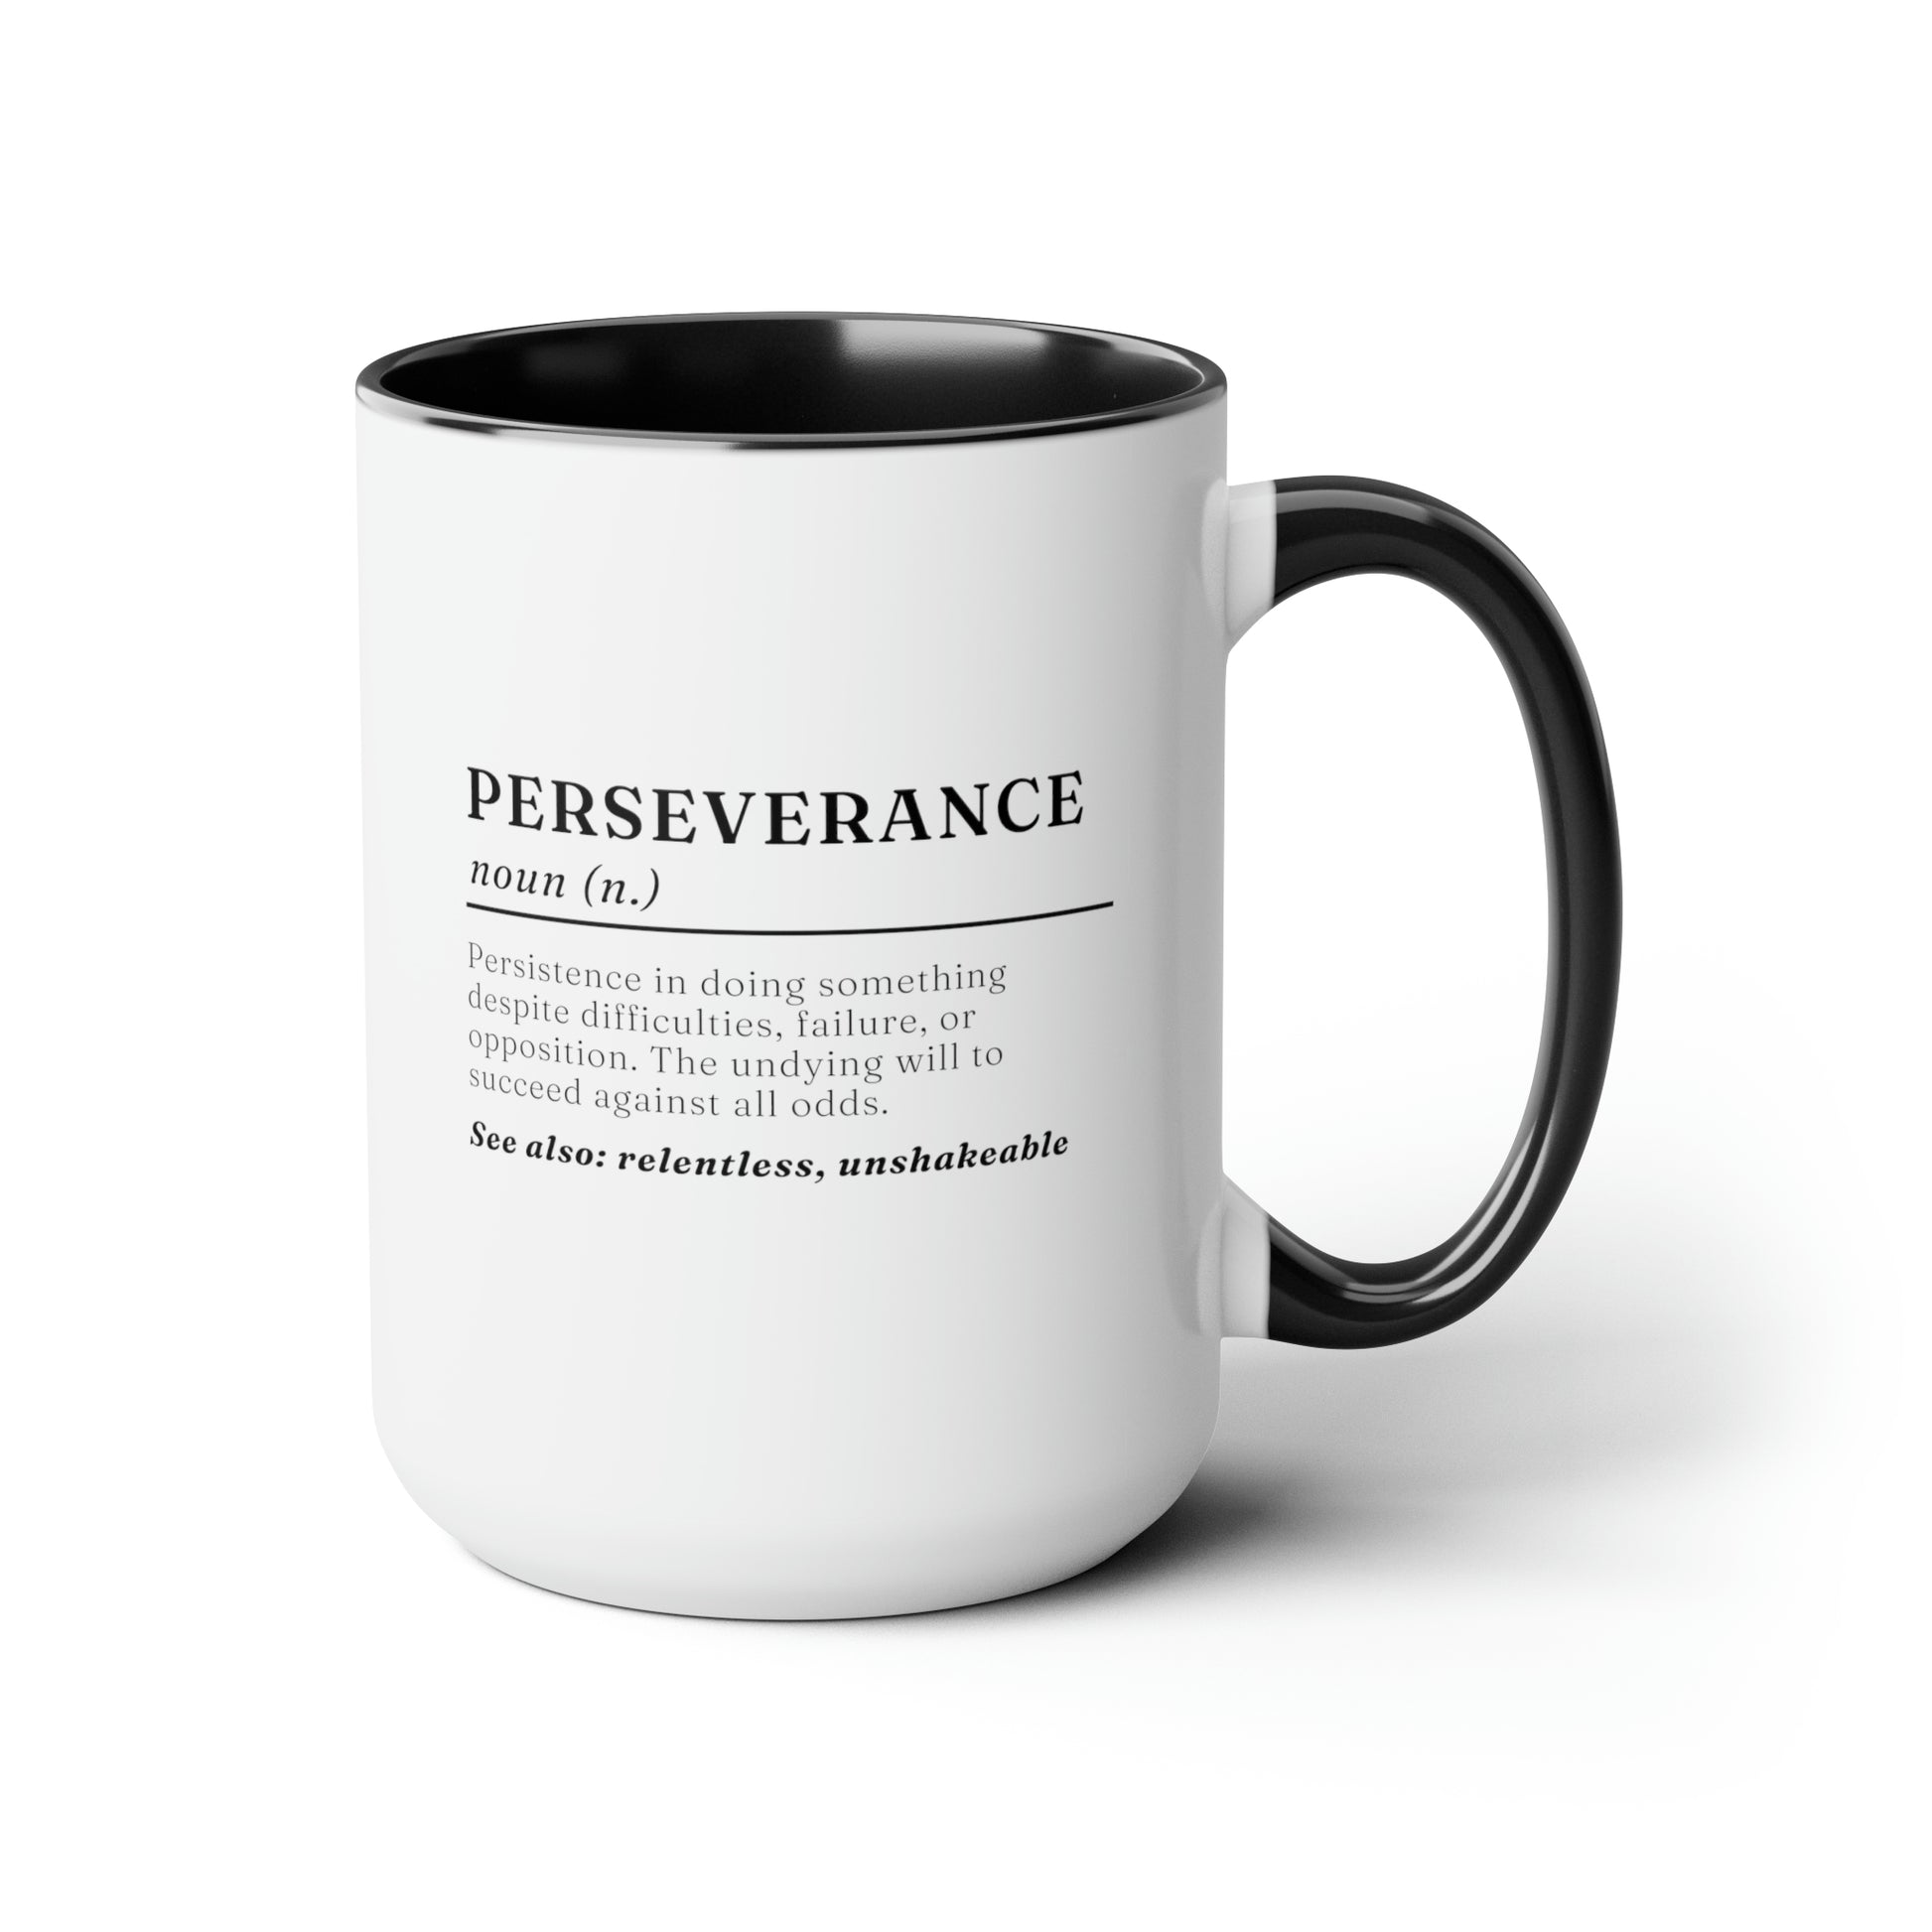 Perseverance Definition 15oz white with black accent funny large coffee mug gift for friend motivational inspirational support resilience tough waveywares wavey wares wavywares wavy wares